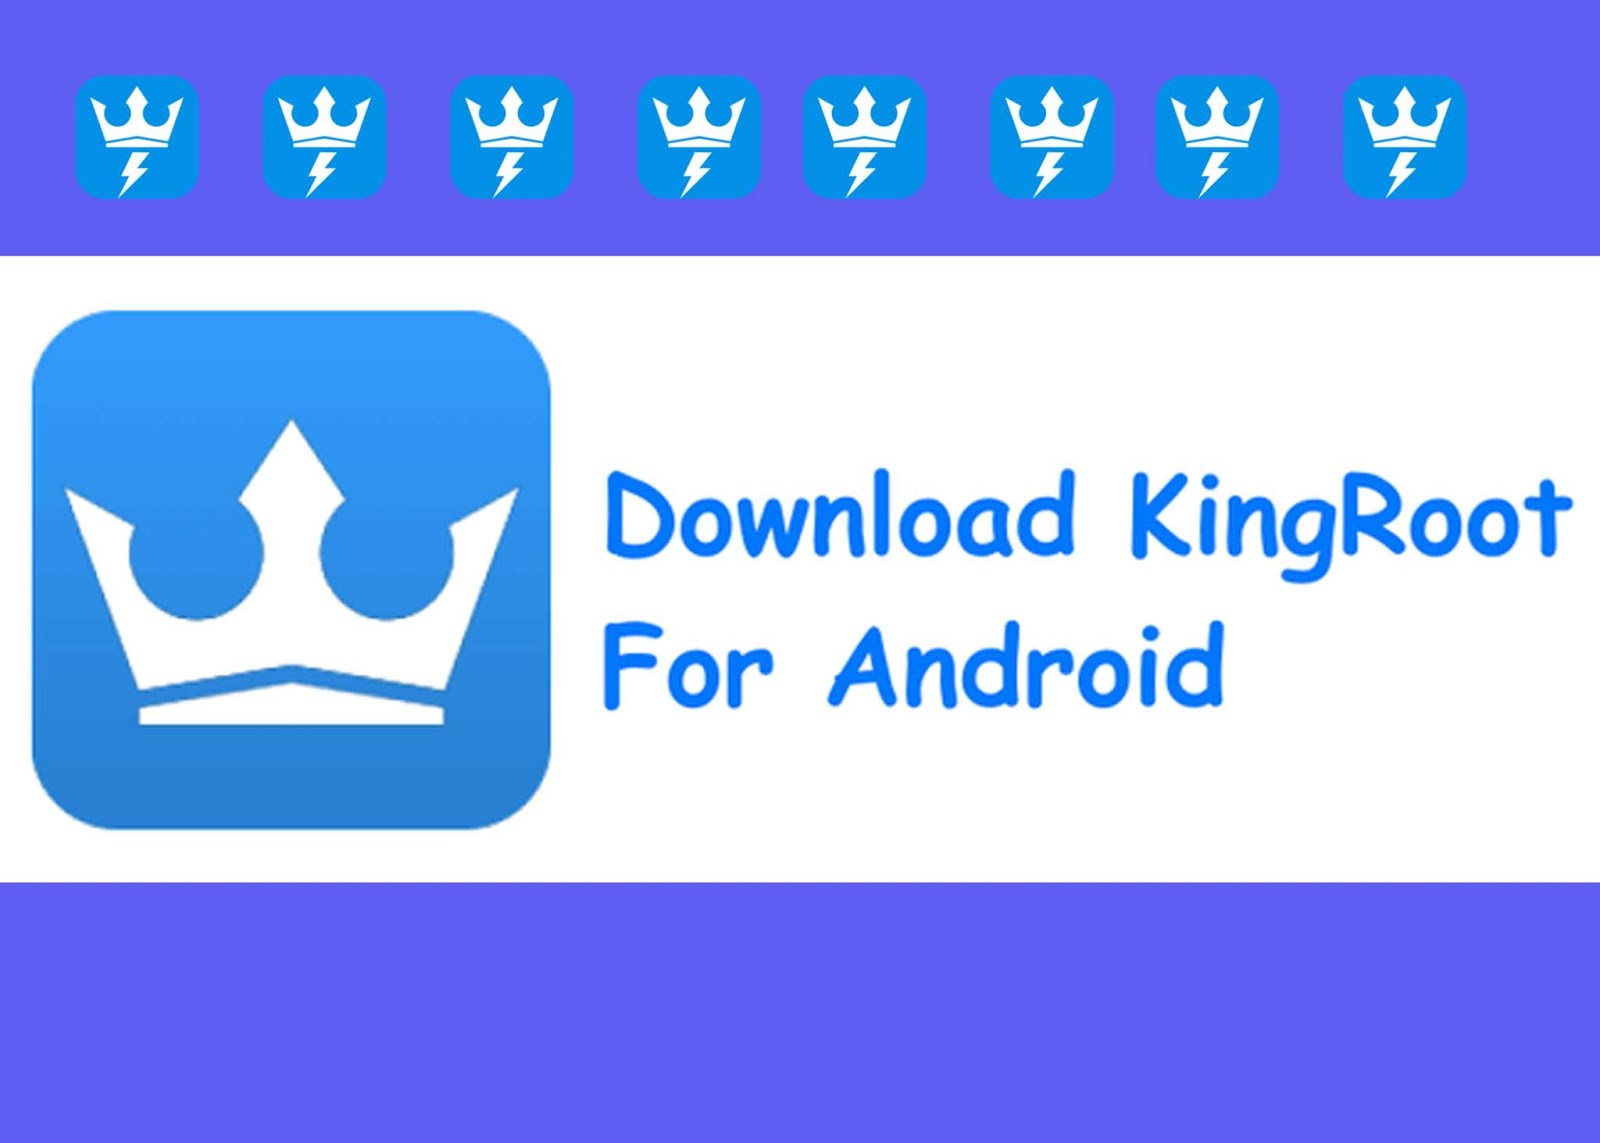 Download kingroot for android version 6.0.1